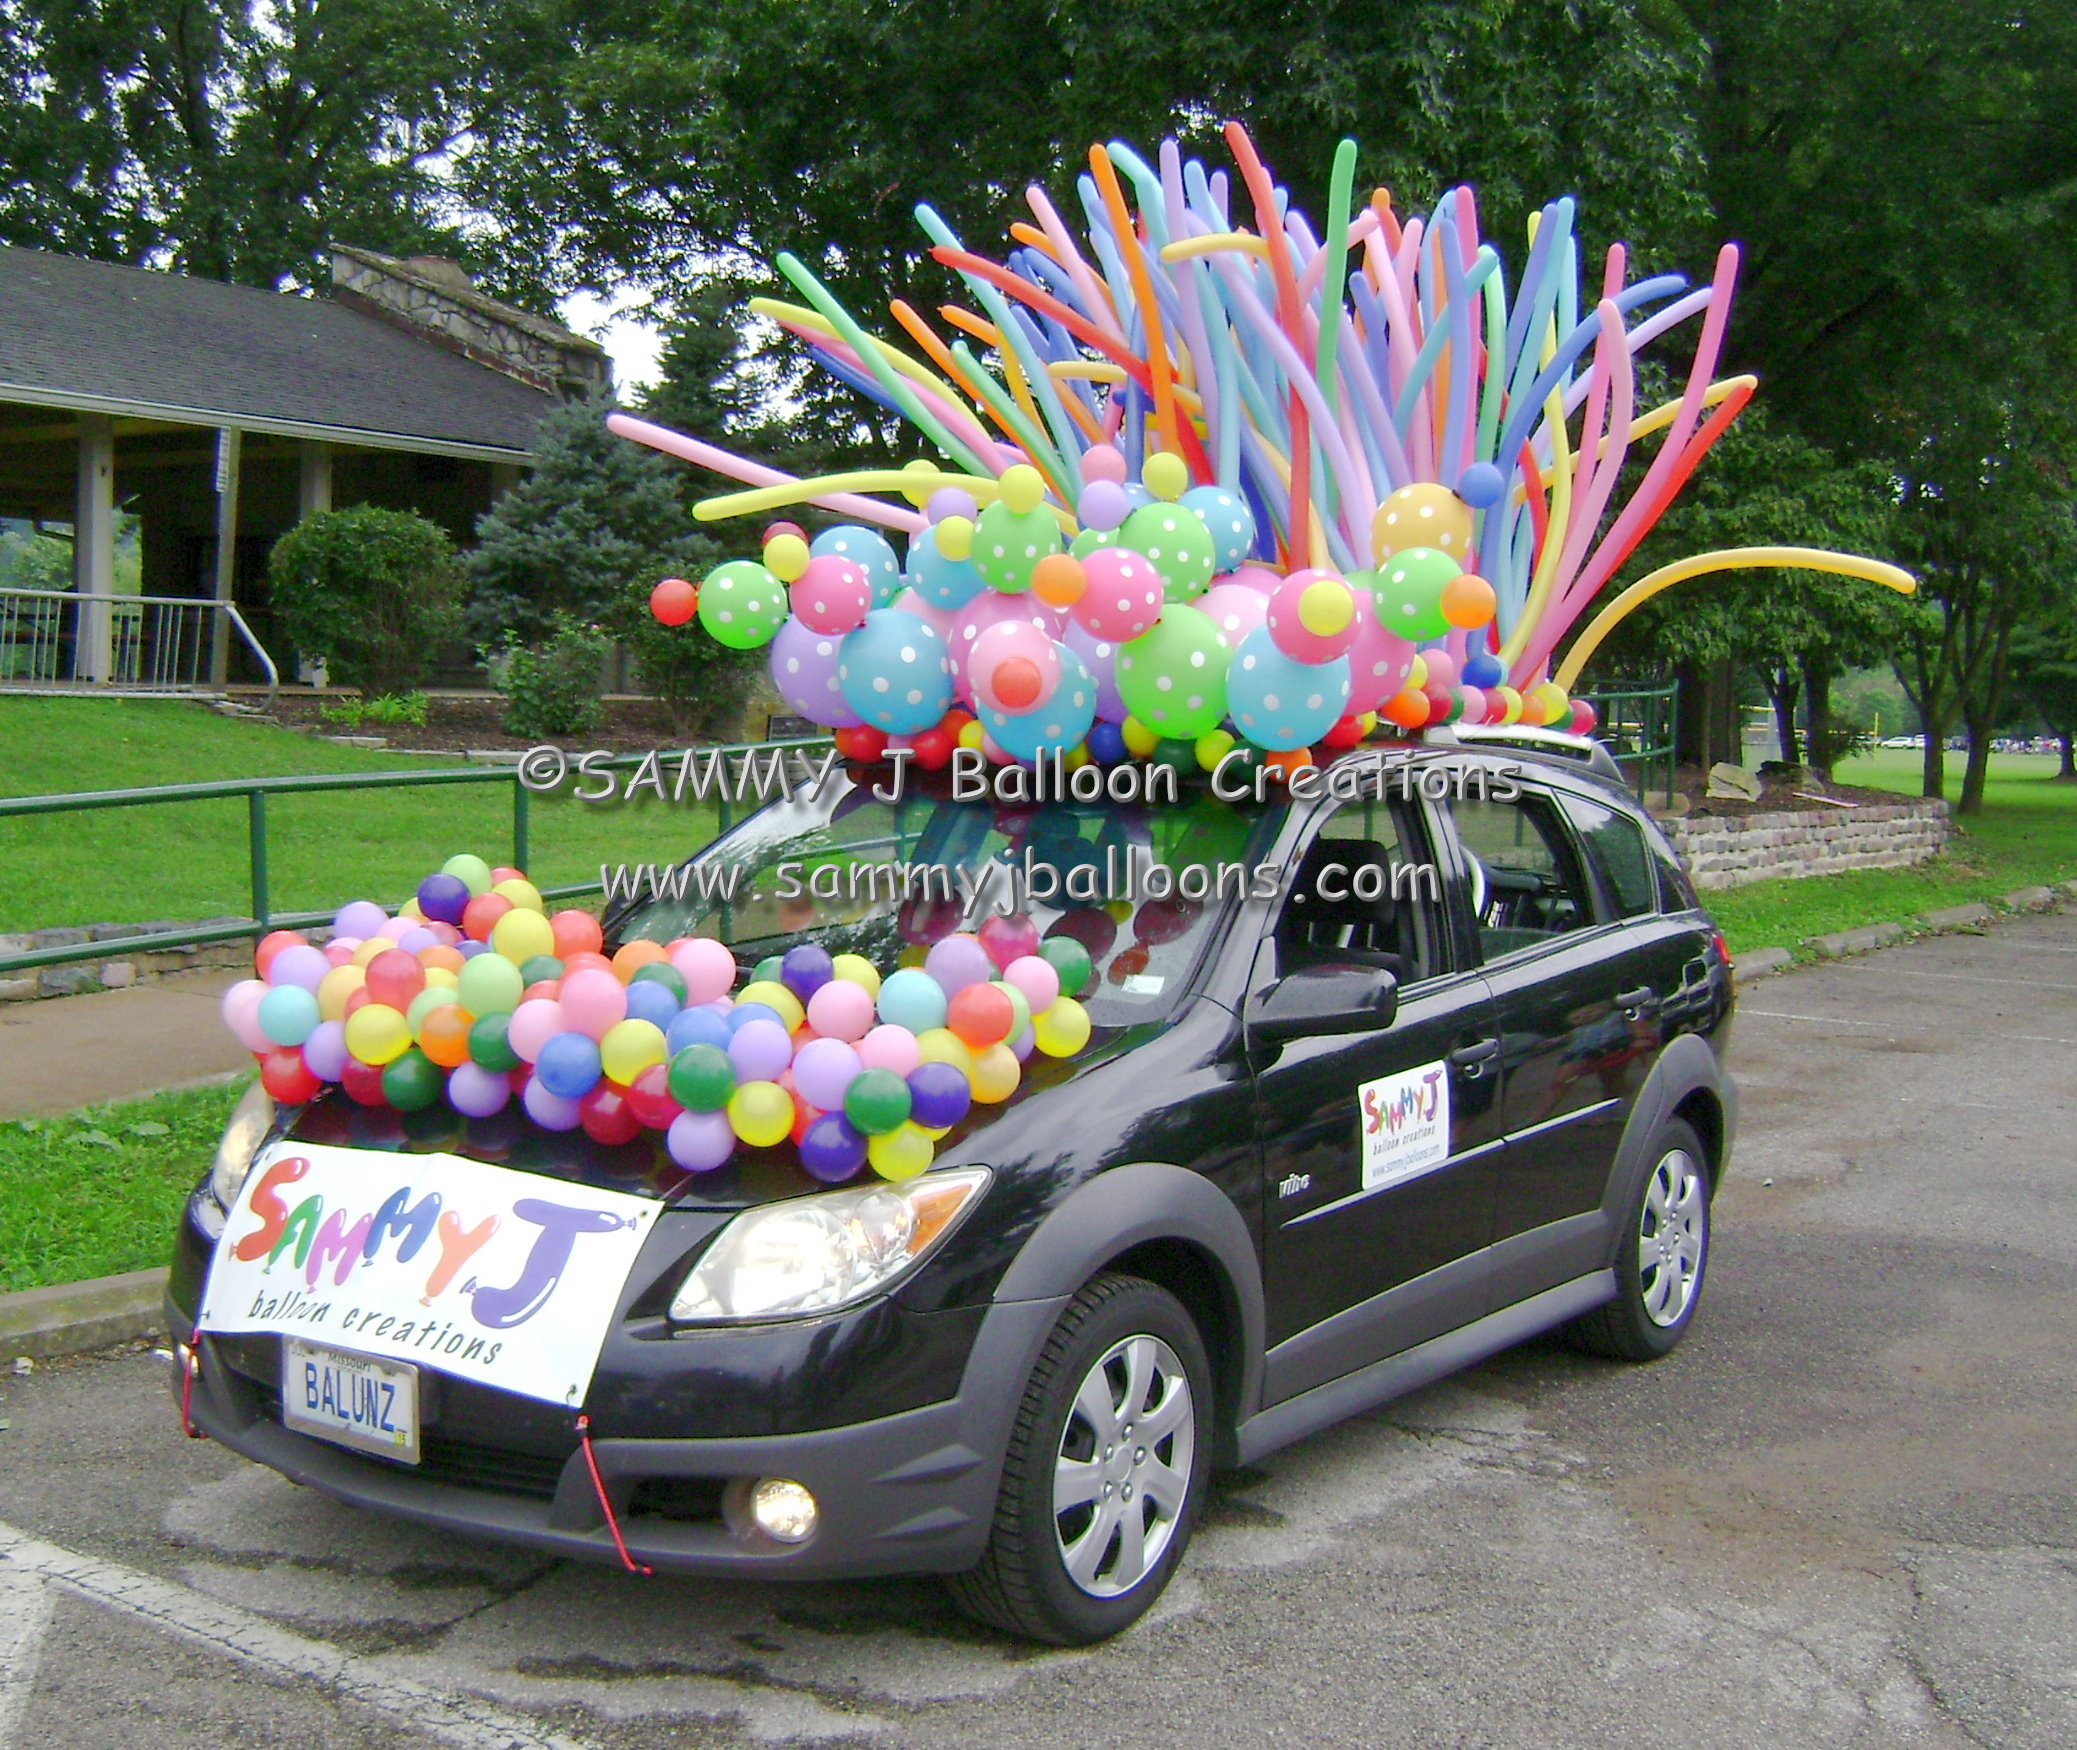 Was invited to decorate my car for a parade. the Polka Dot Link-O ...